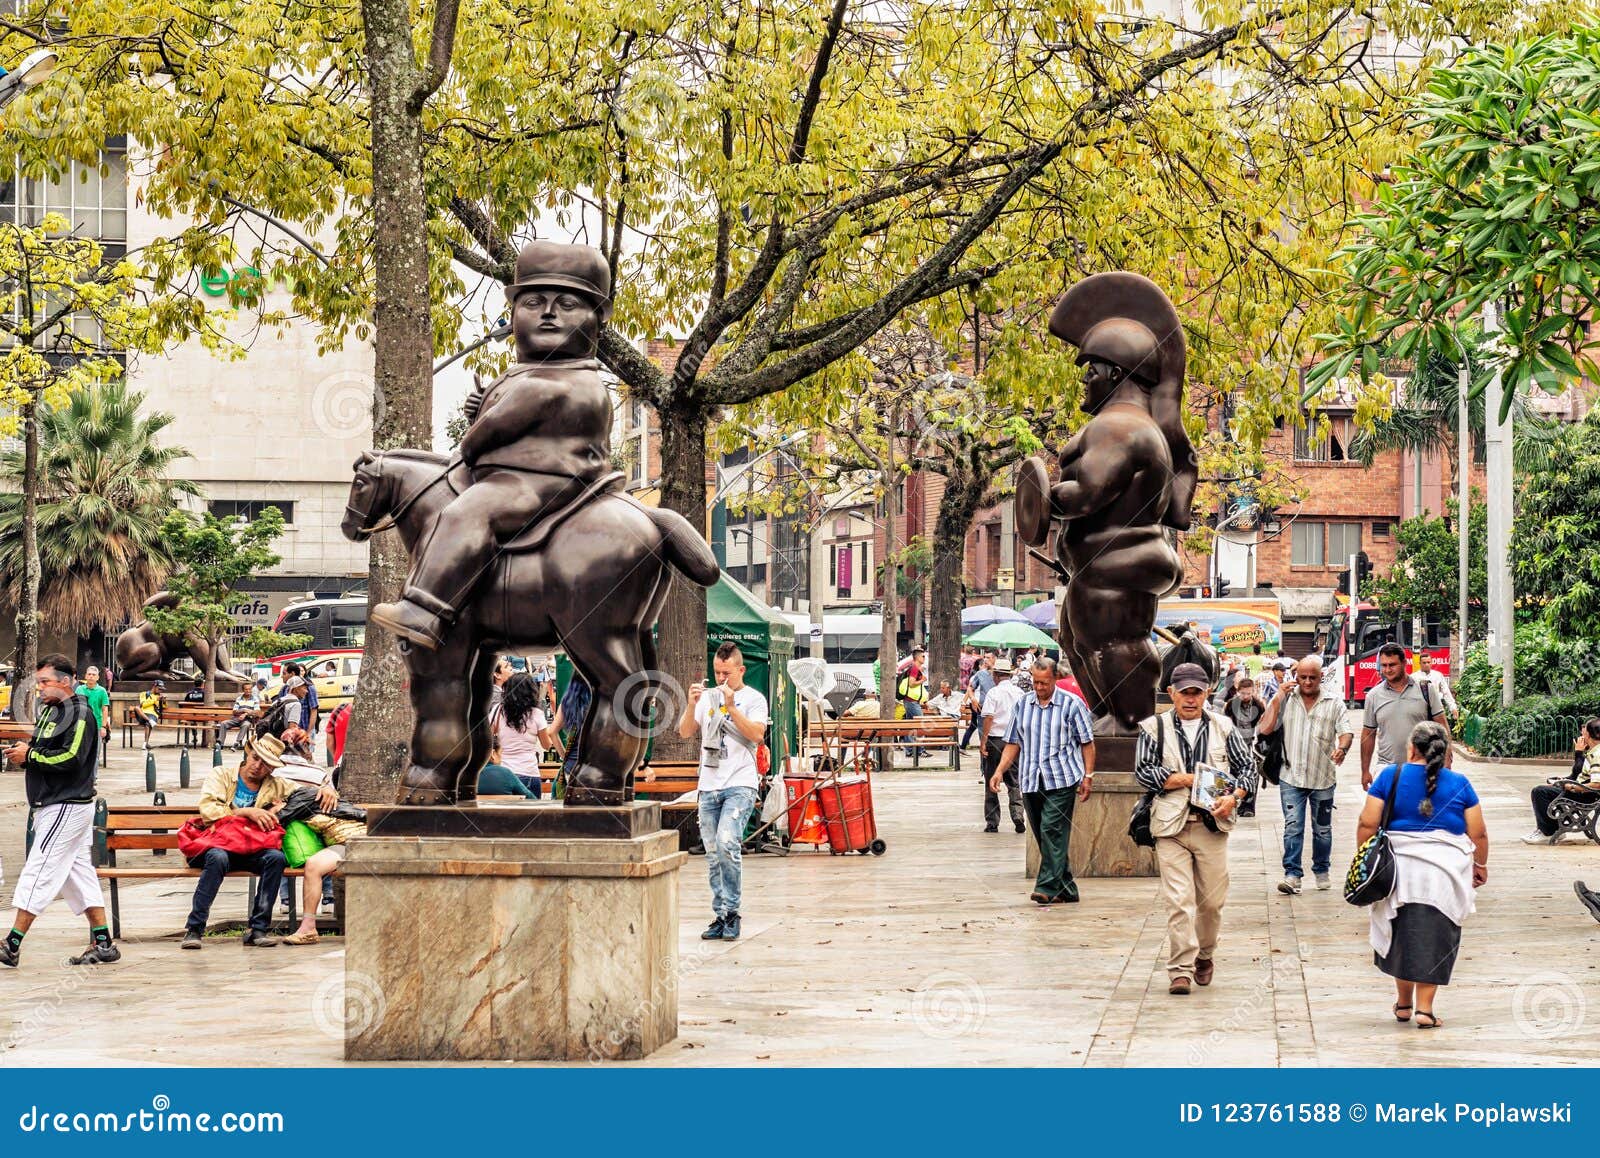 Botero sculptures located at Botero sculptures square in Medellin, Colombia. Medellin, Colombia, March 24, 2018: Tourists walking by Botero sculptures located at Botero Plaza in Medellin, Colombia. He donated 23 sculptures to town, it is the most visited place by tourists.